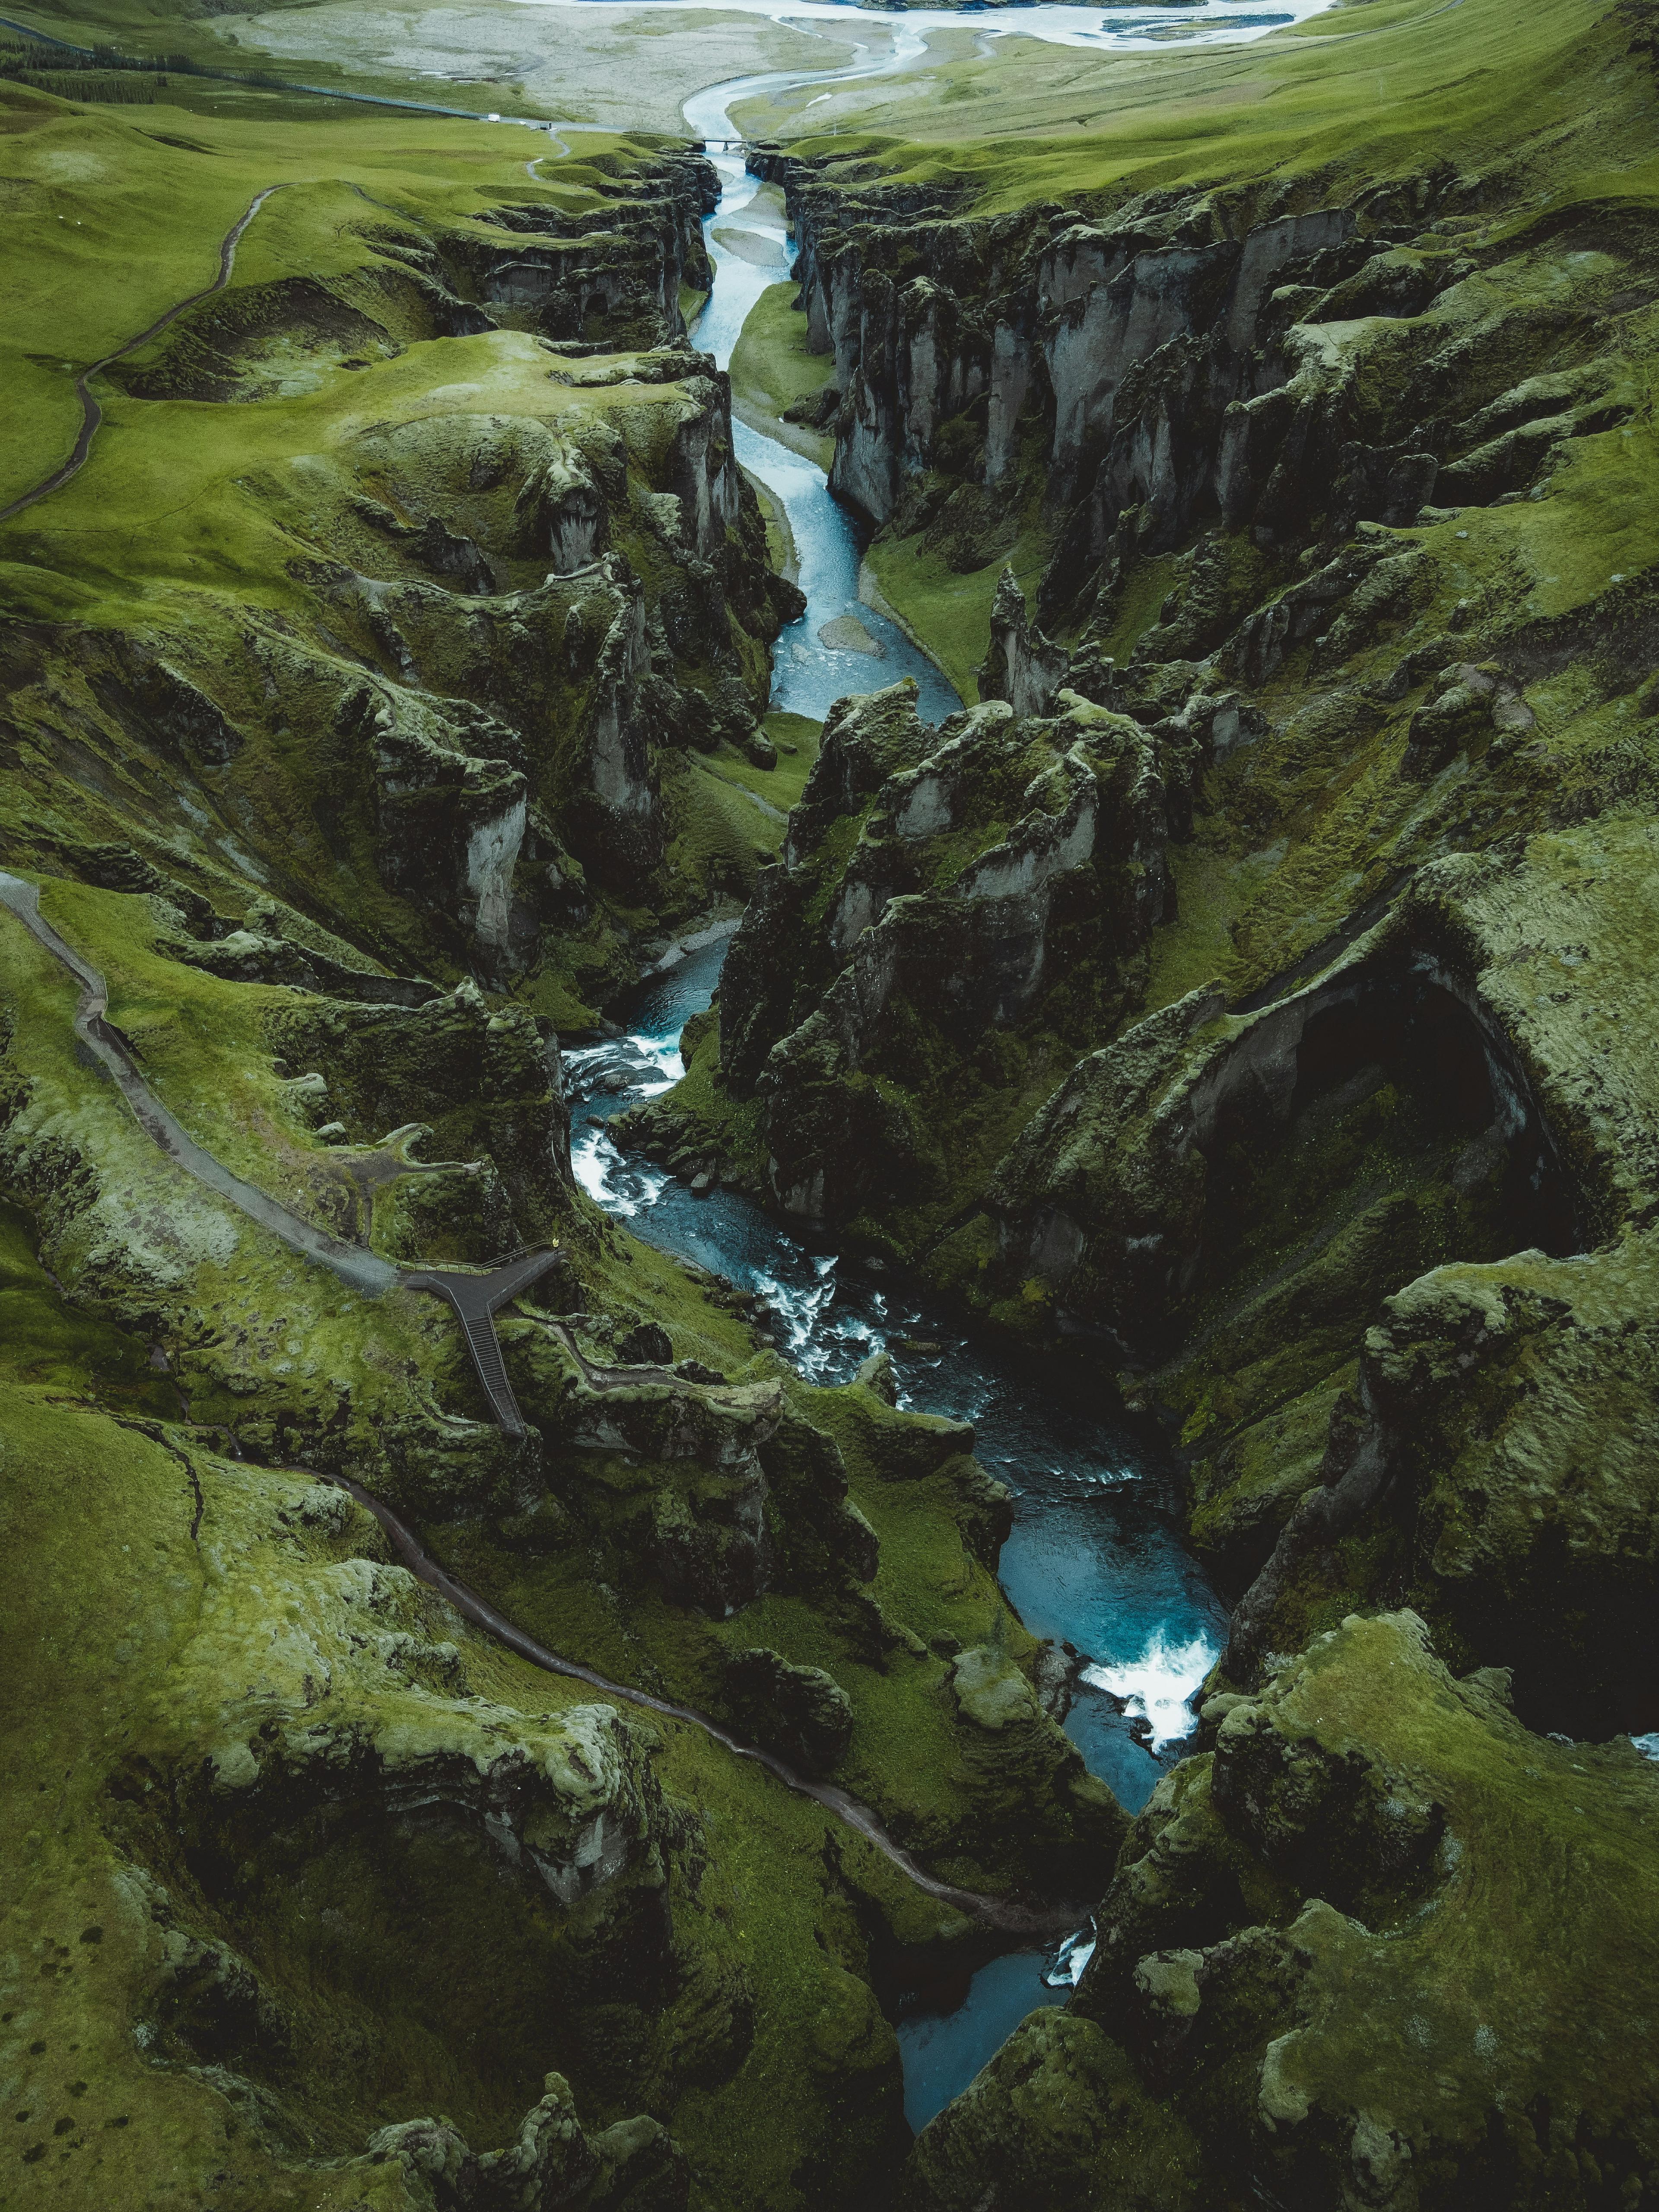 Aerial view of a dramatic, lush green canyon with winding turquoise rivers and waterfalls, carving through the rugged terrain under a cloudy sky.